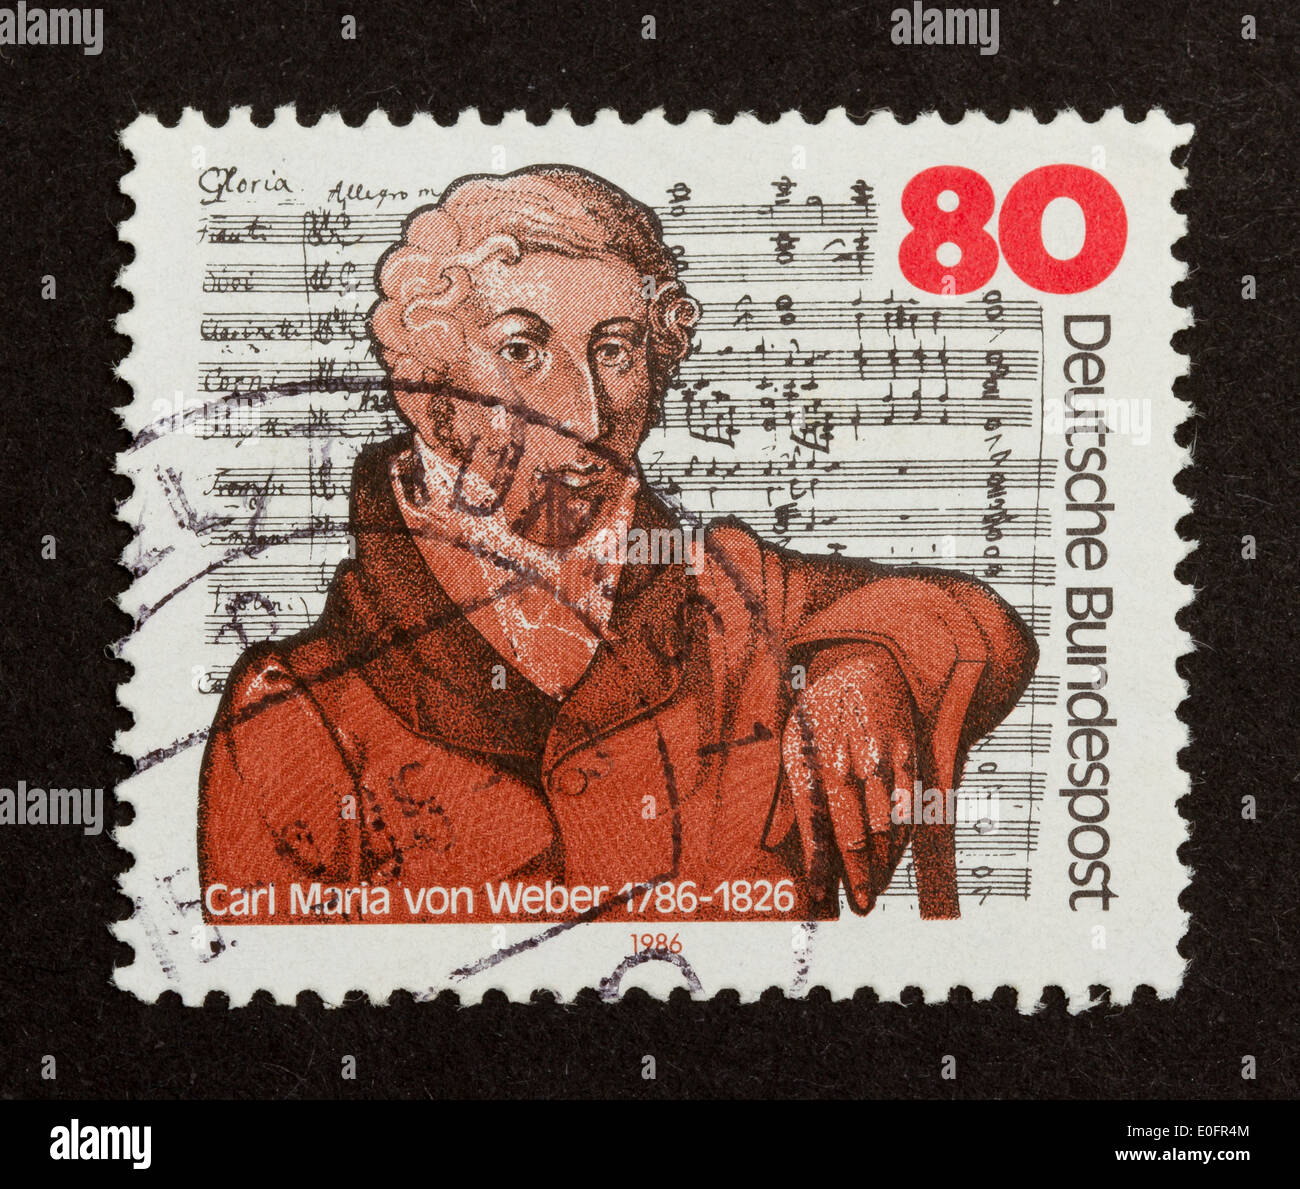 GERMANY - CIRCA 1980: Stamp printed in Germany shows Carl Maria von Weber, circa 1980 Stock Photo